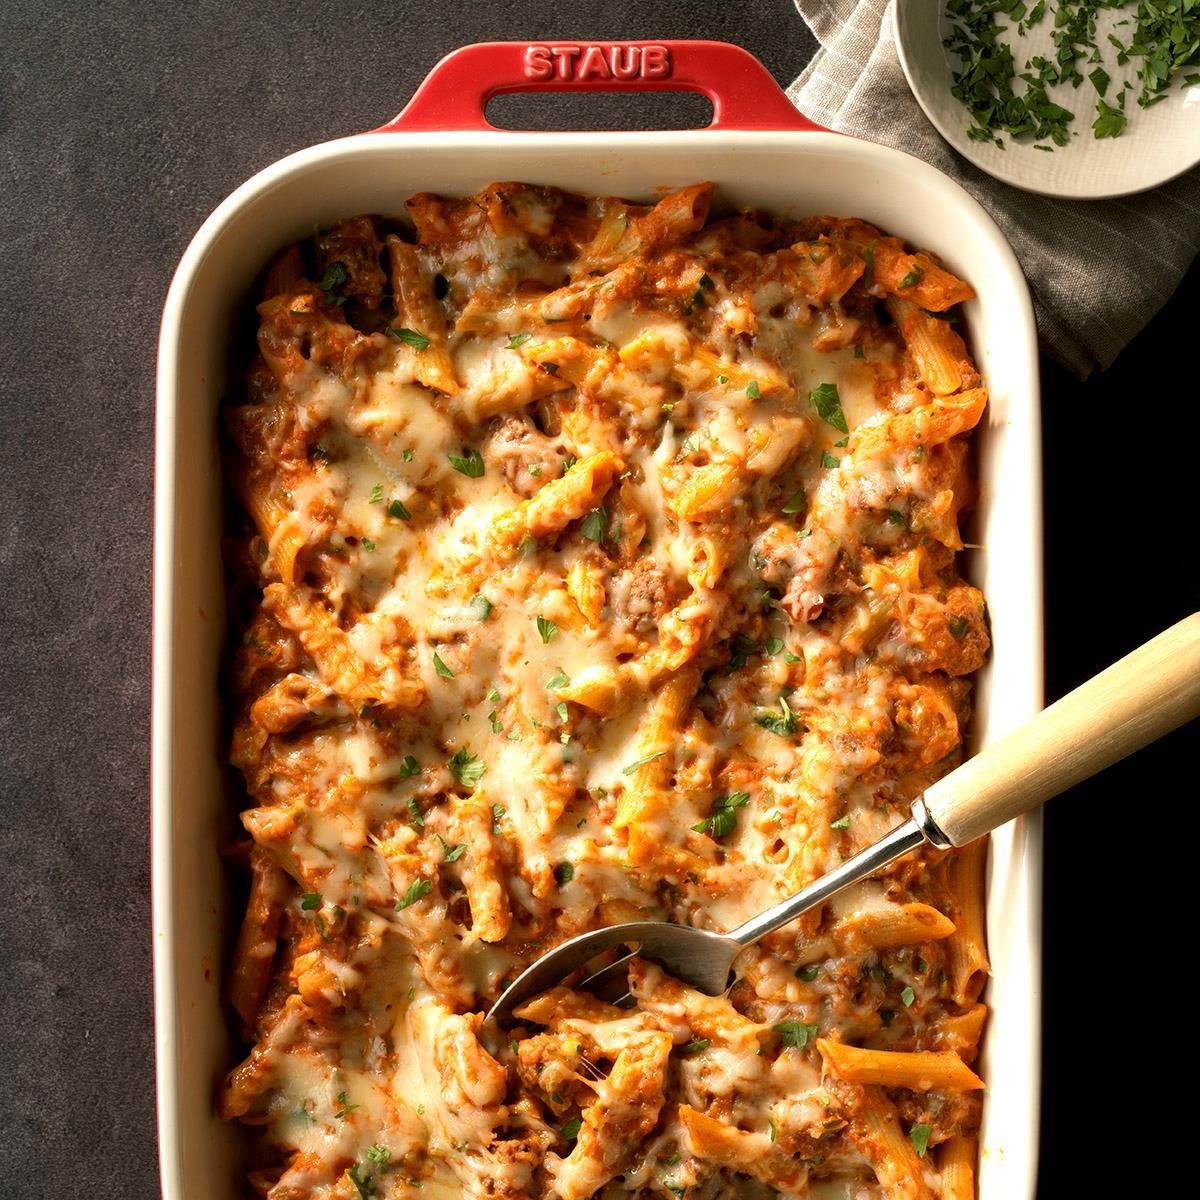 Penne Beef Bake Recipe: How to Make It